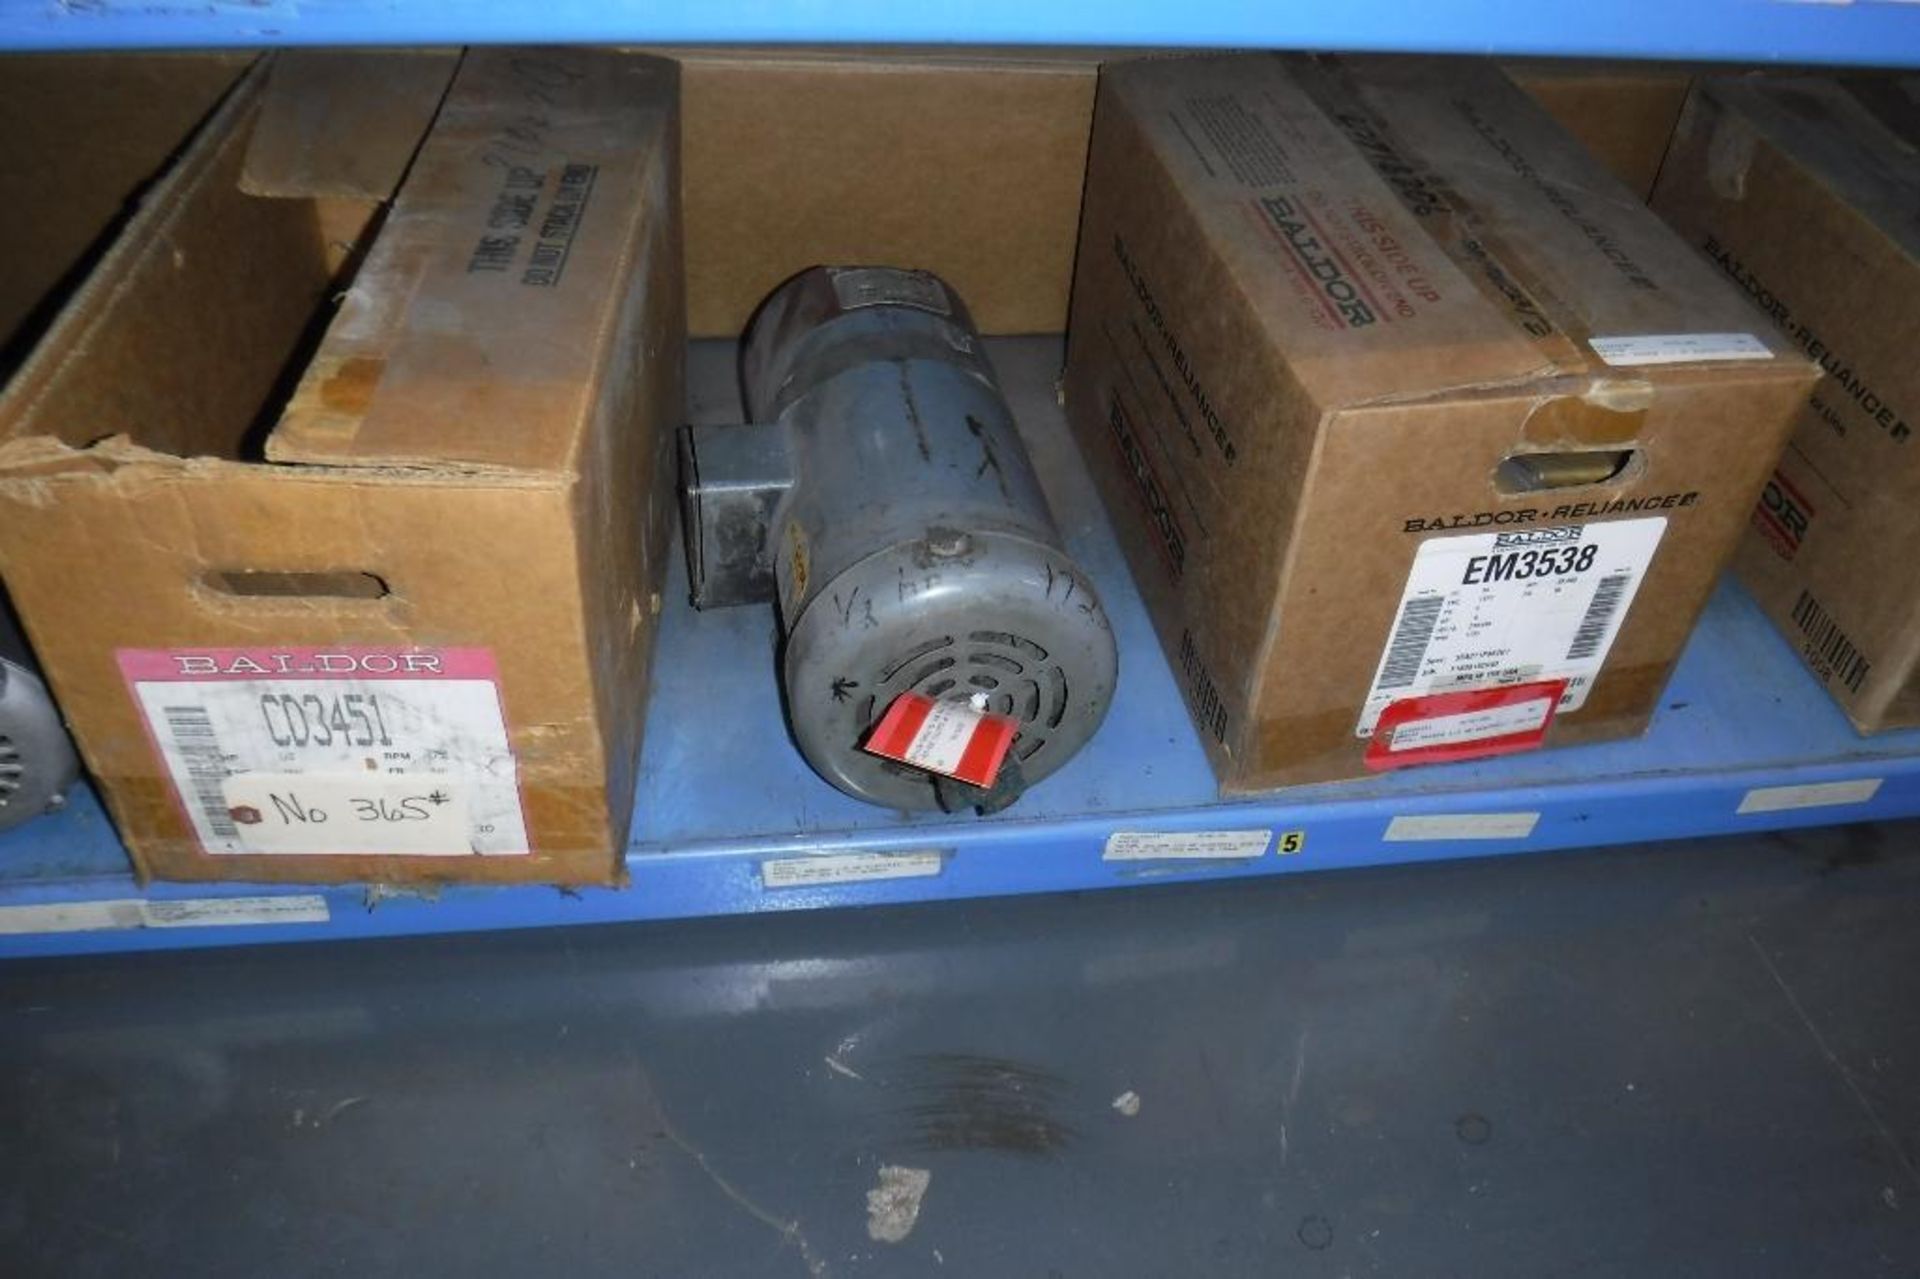 Contents of Rack 507S-Motors, Containers, Etc., MUST REMOVE BY 2/14/20-MUST BE REMOVED IN THE ENTIRI - Image 26 of 27